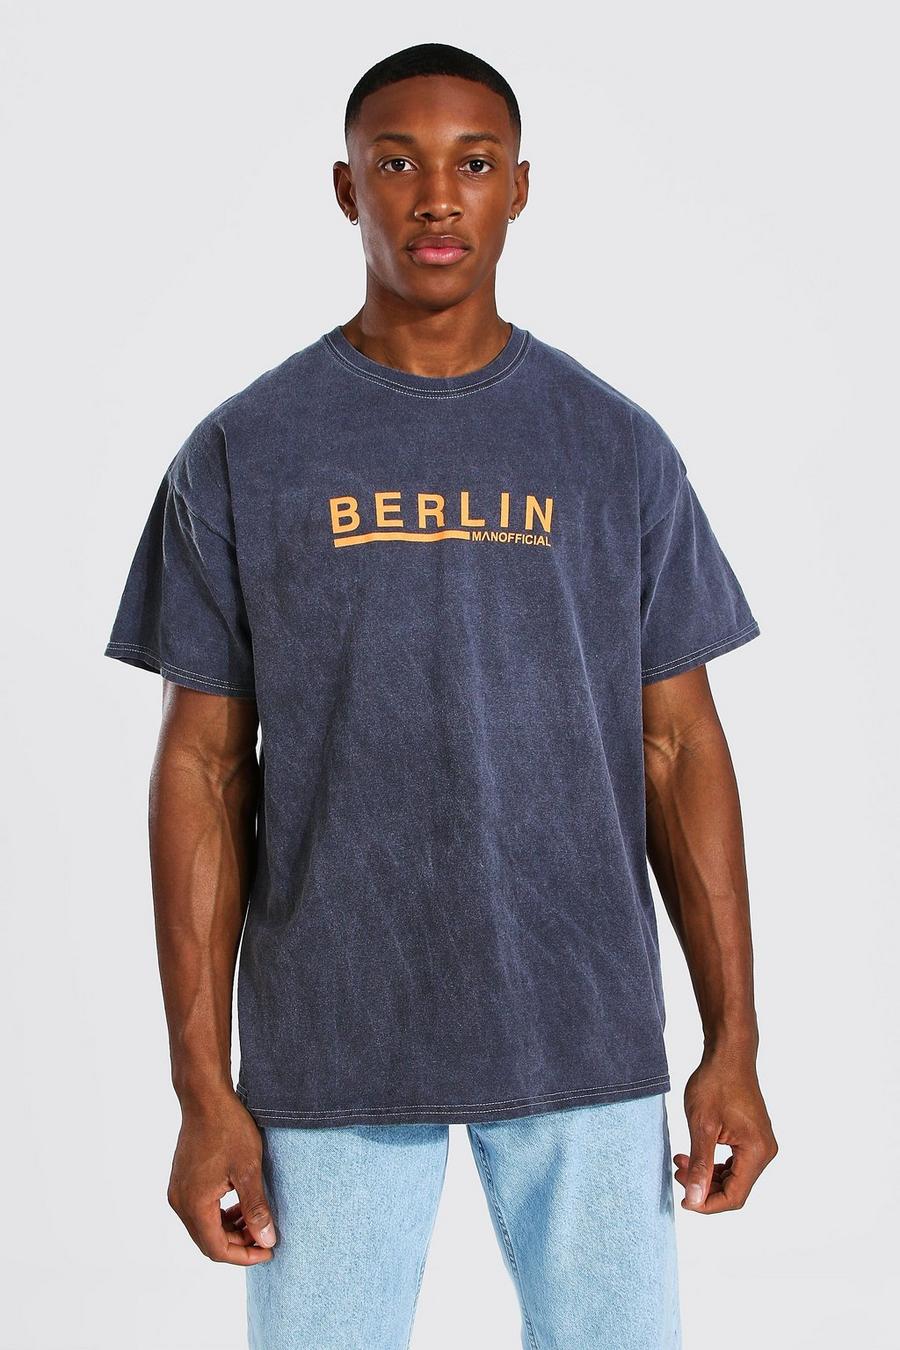 Charcoal grey Oversized Overdyed Berlin Graphic T-Shirt image number 1